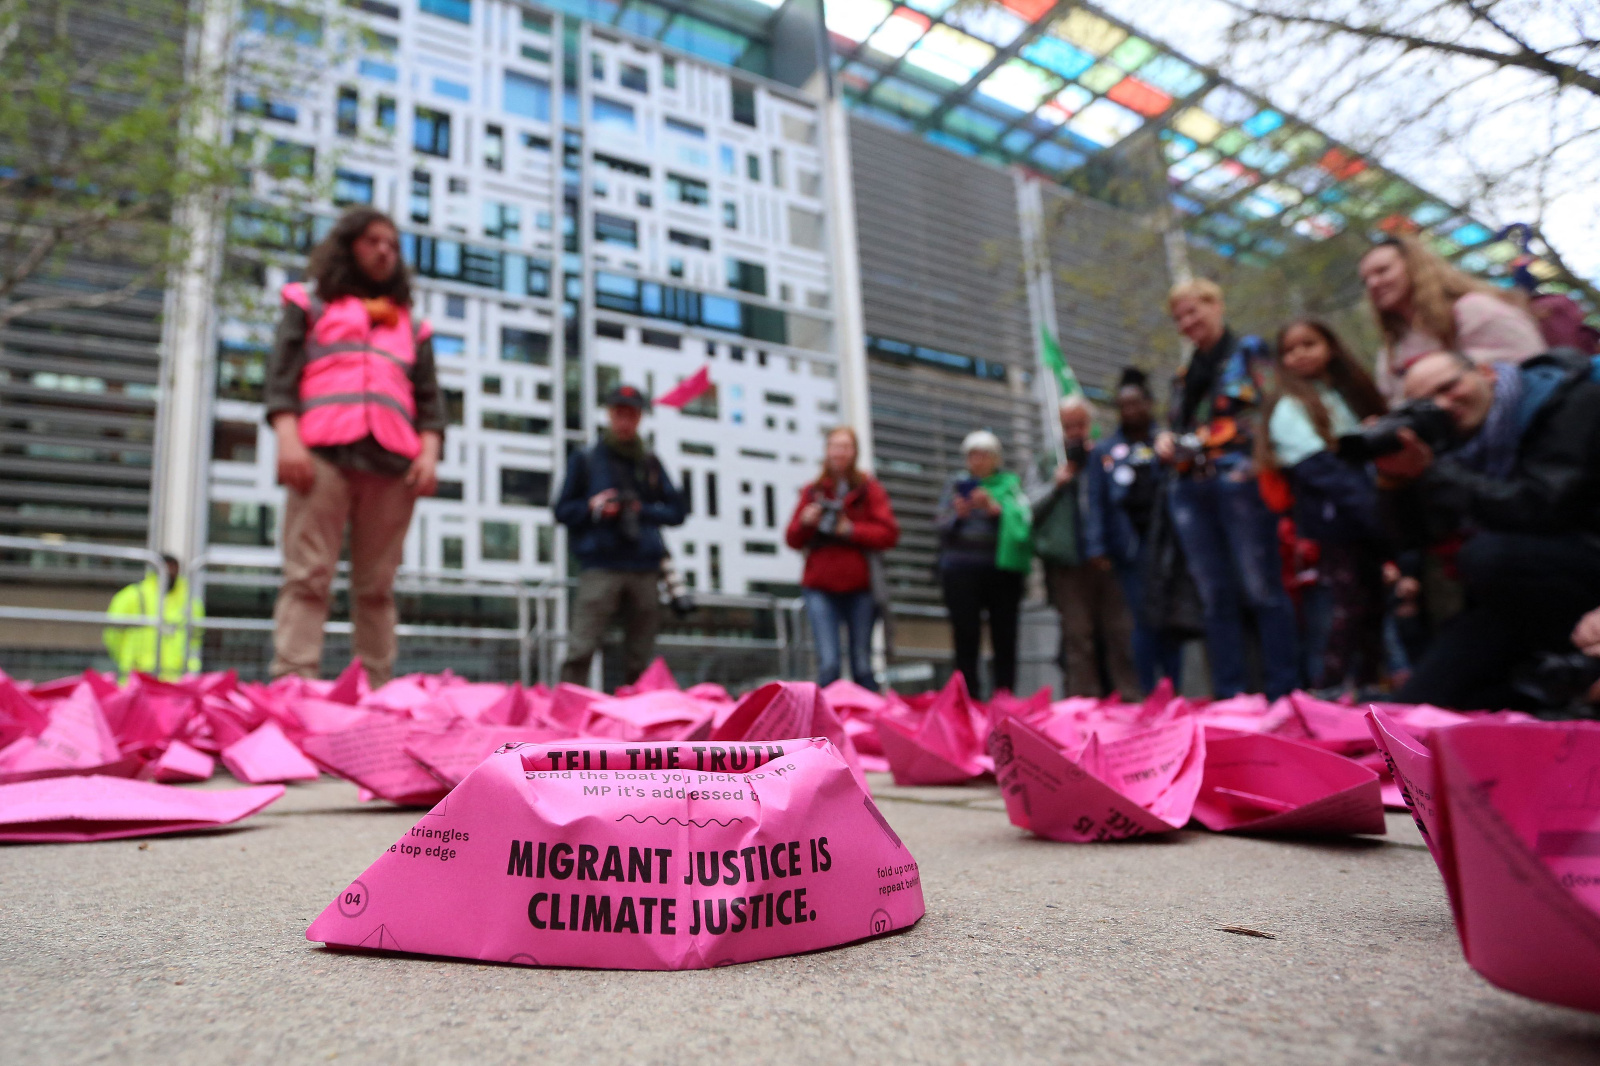 A pink, boat-shaped item at a protest says "migrant justice is climate justice."